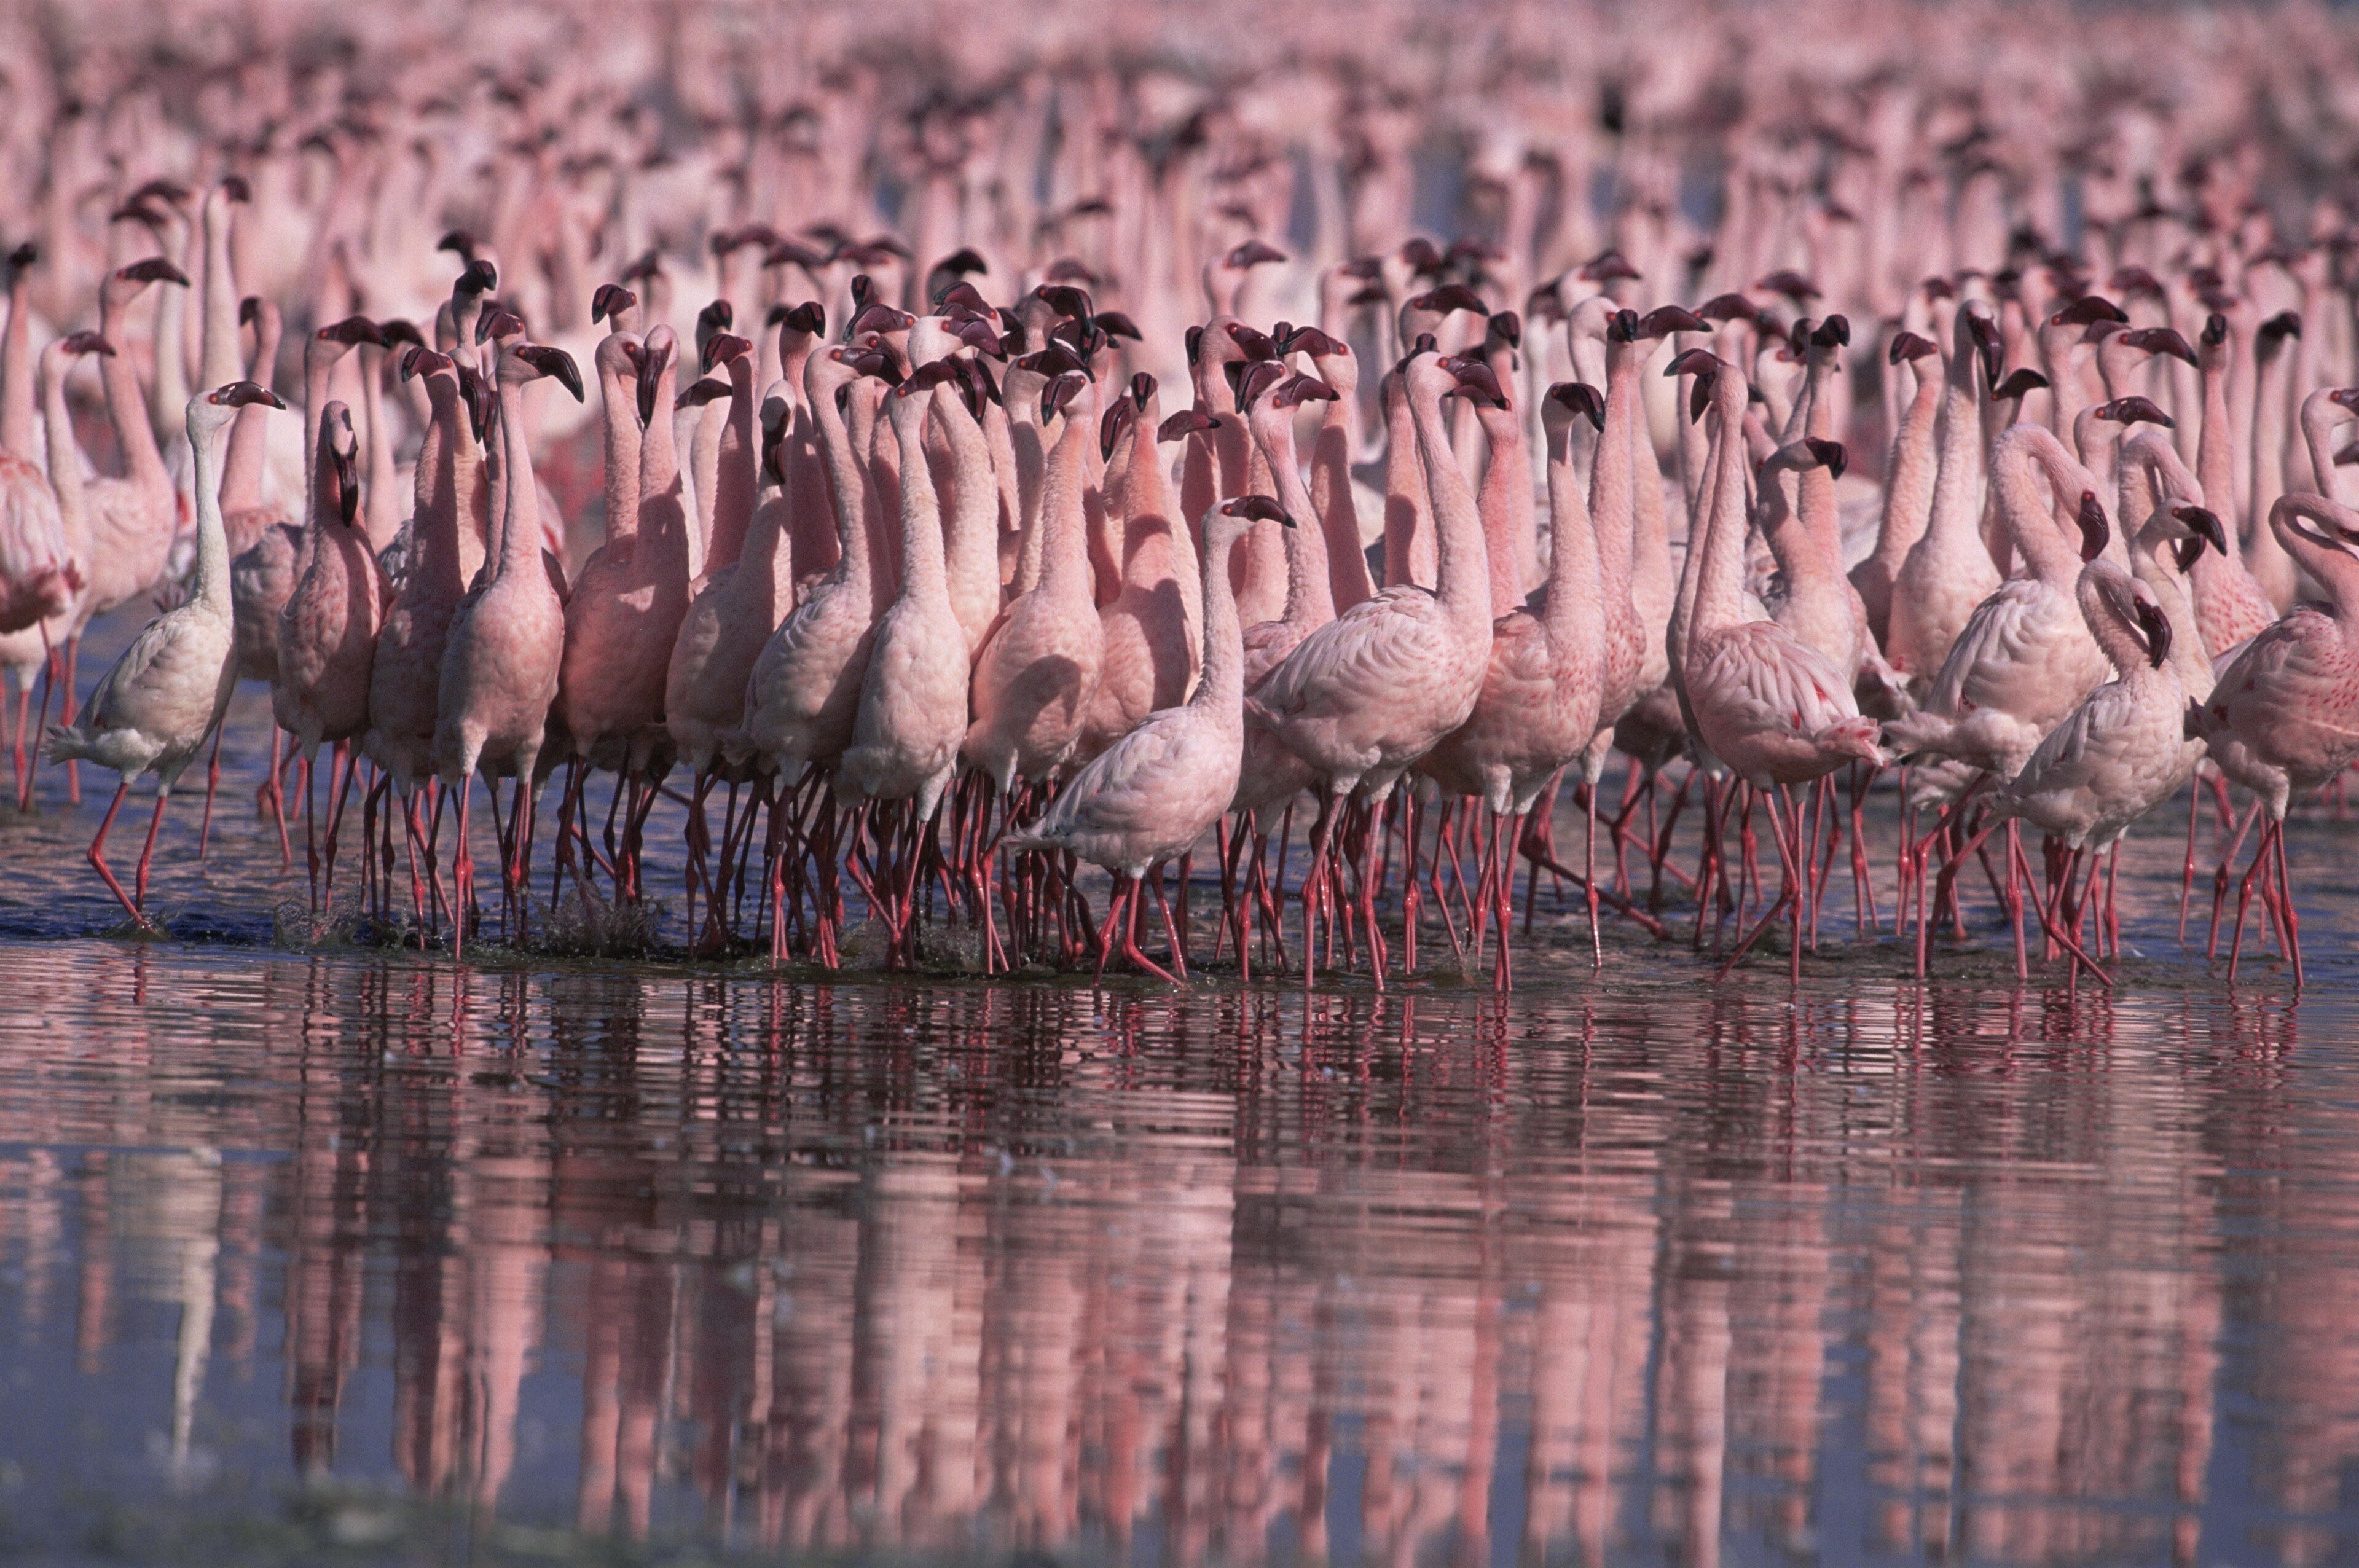 Hundreds of flamingos charge towards the water.